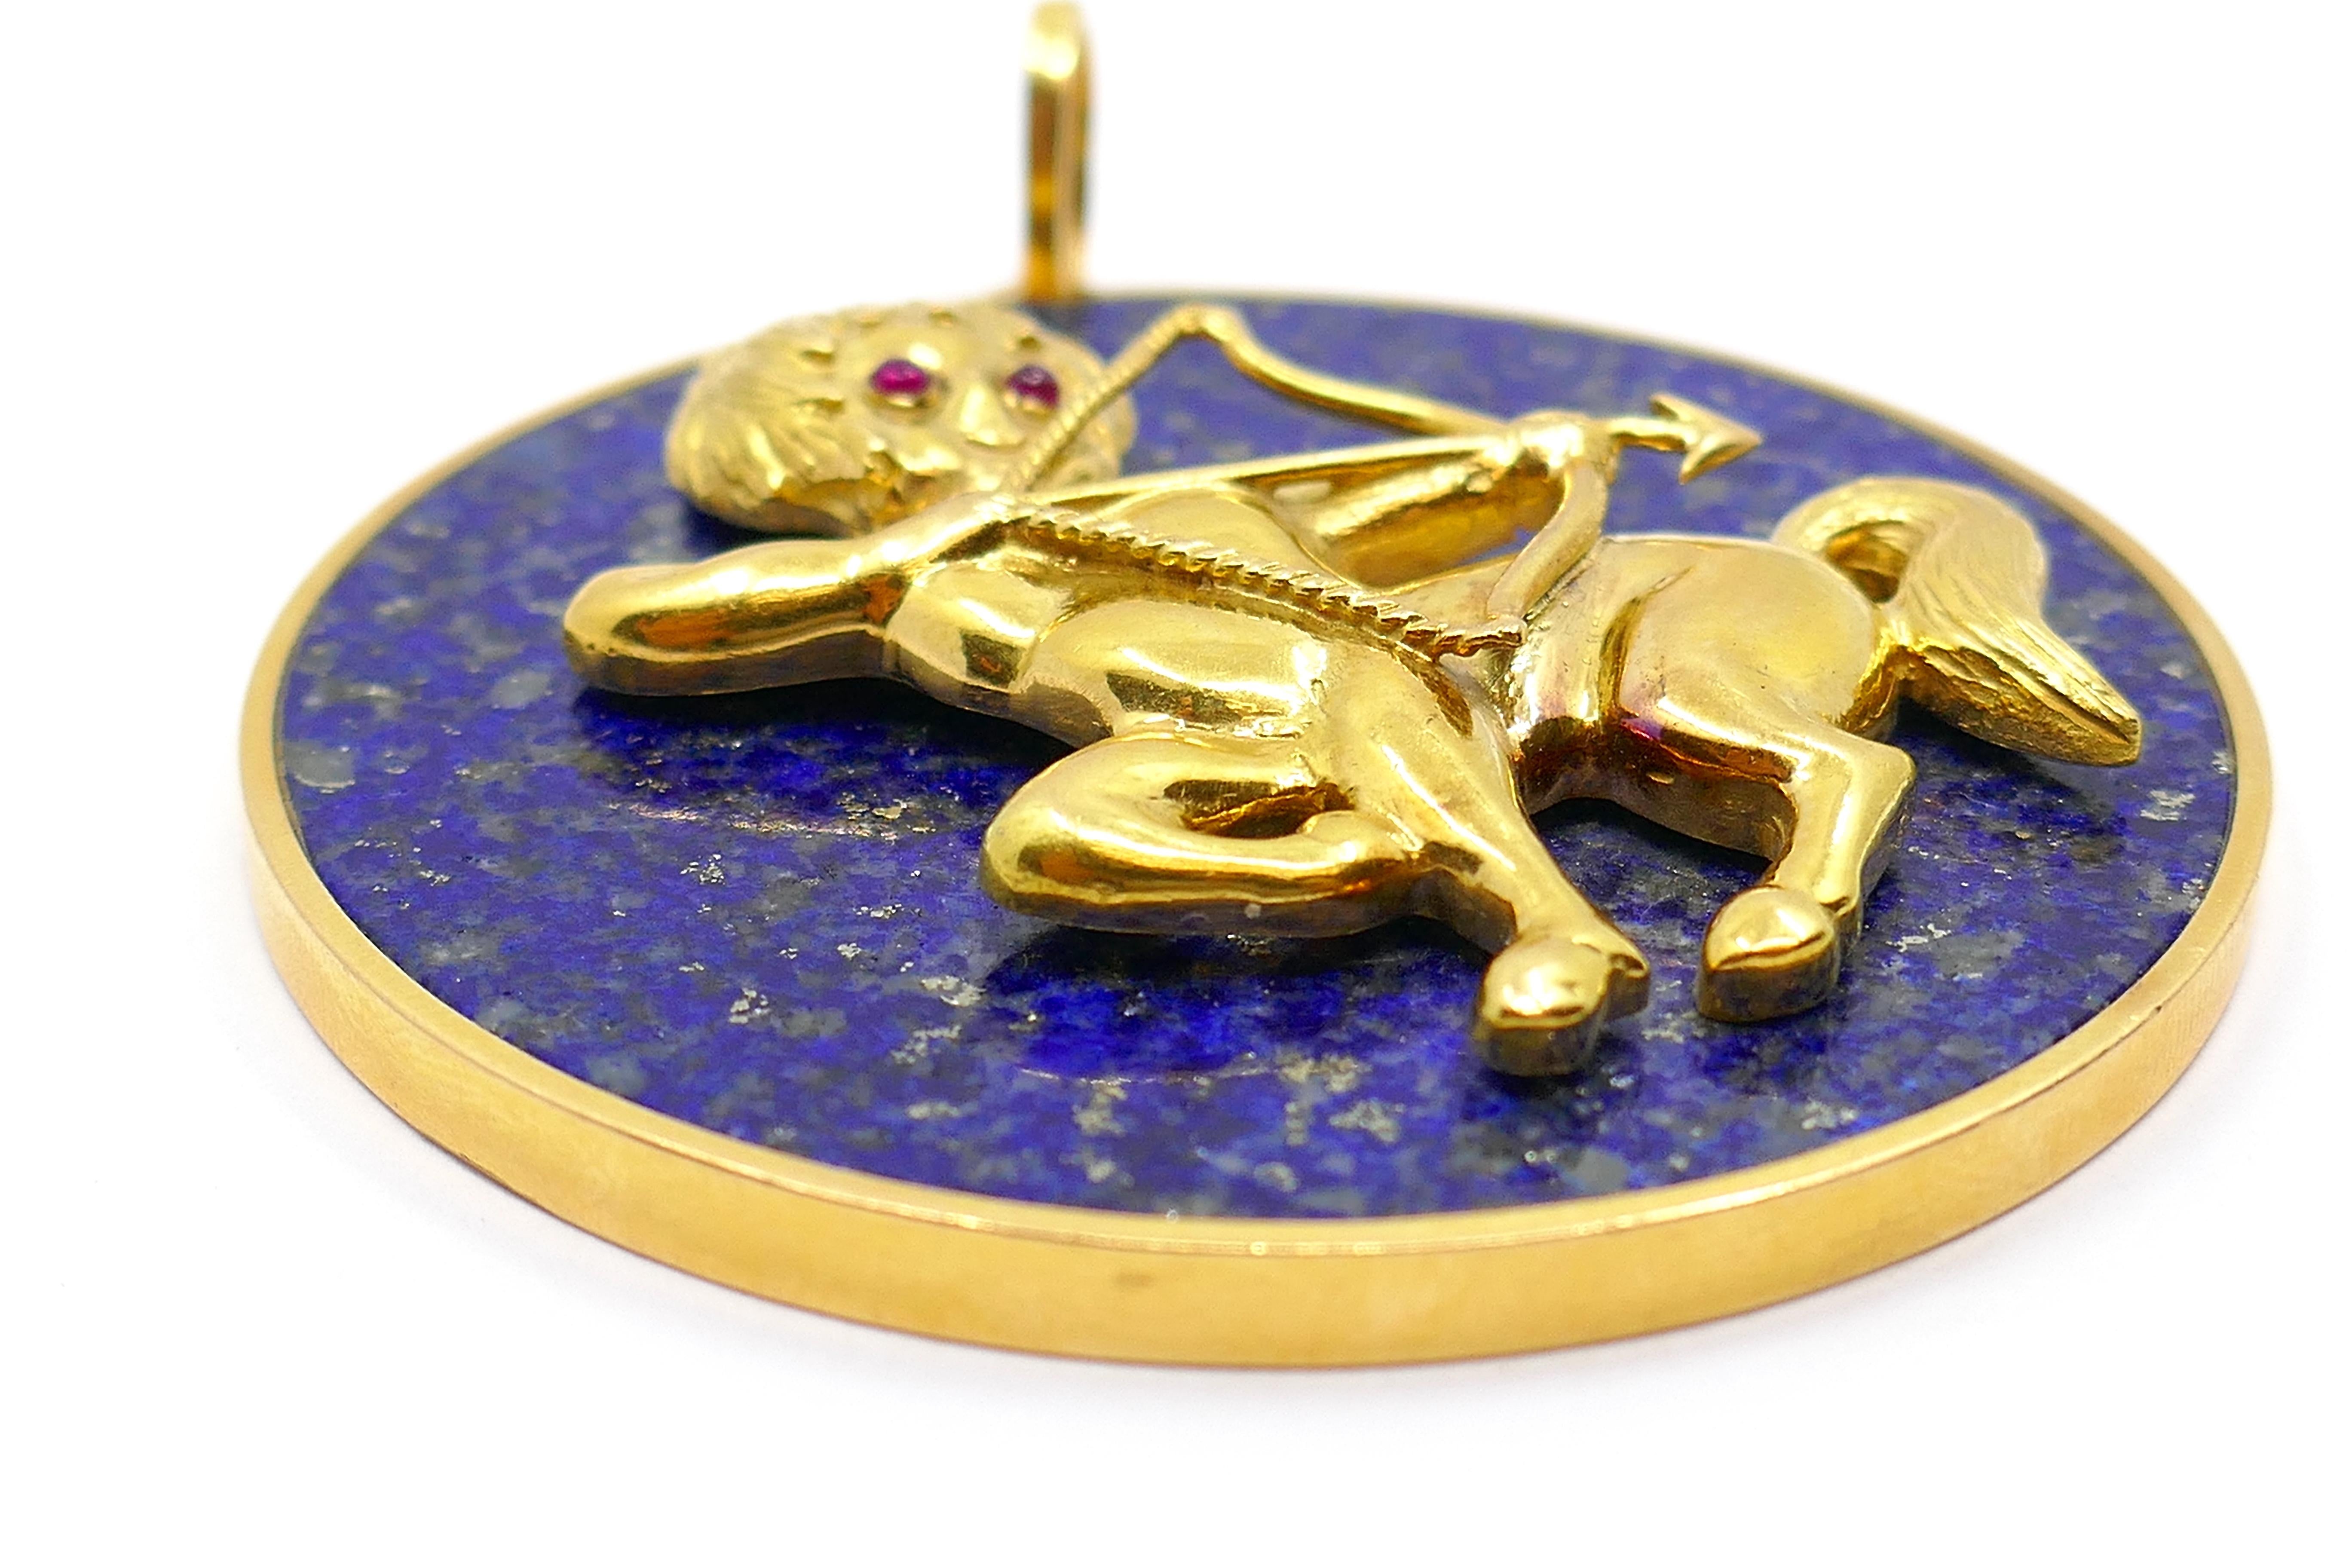 This Sagittarius astrological pendant is a unique and timeless piece that beautifully marries astrology with artistry. Crafted in the 1970s in France, it holds a sense of history and charm. Made from 18K gold, lapis lazuli, and cabochon rubies, it